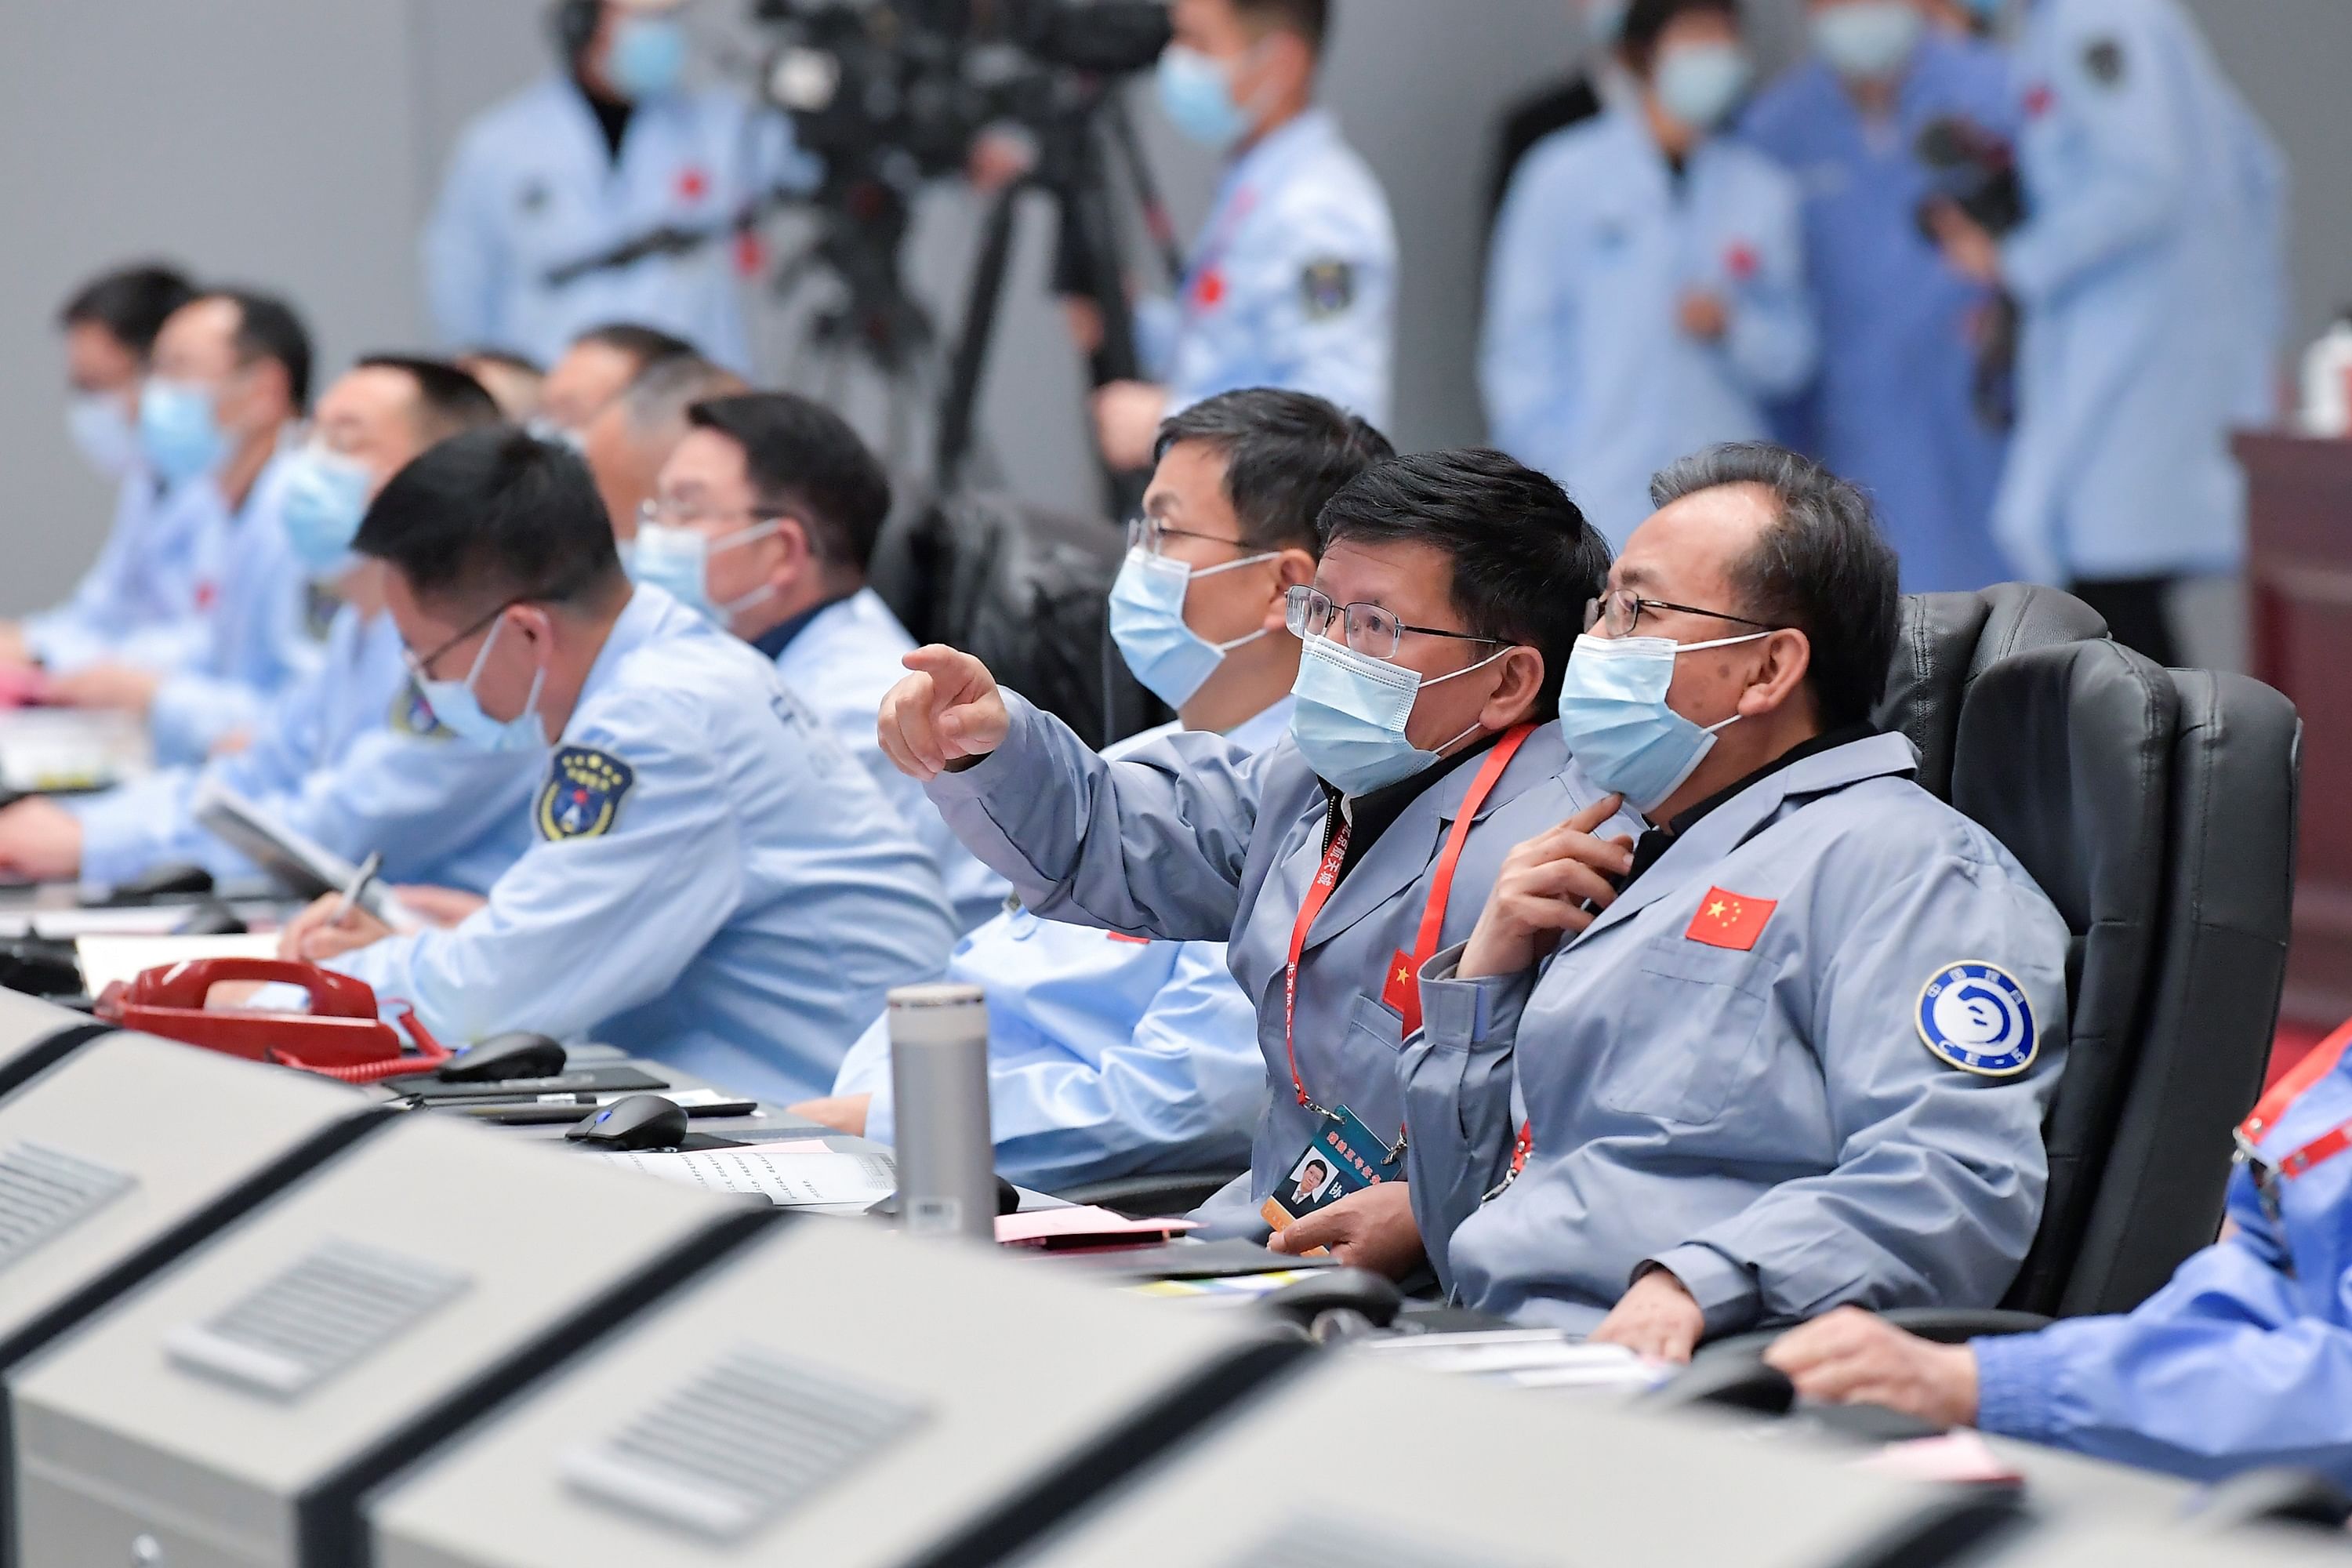 Technical personnel monitoring the process during the Chang'e-5 lunar probe landing on the moon. Credit: AFP Photo